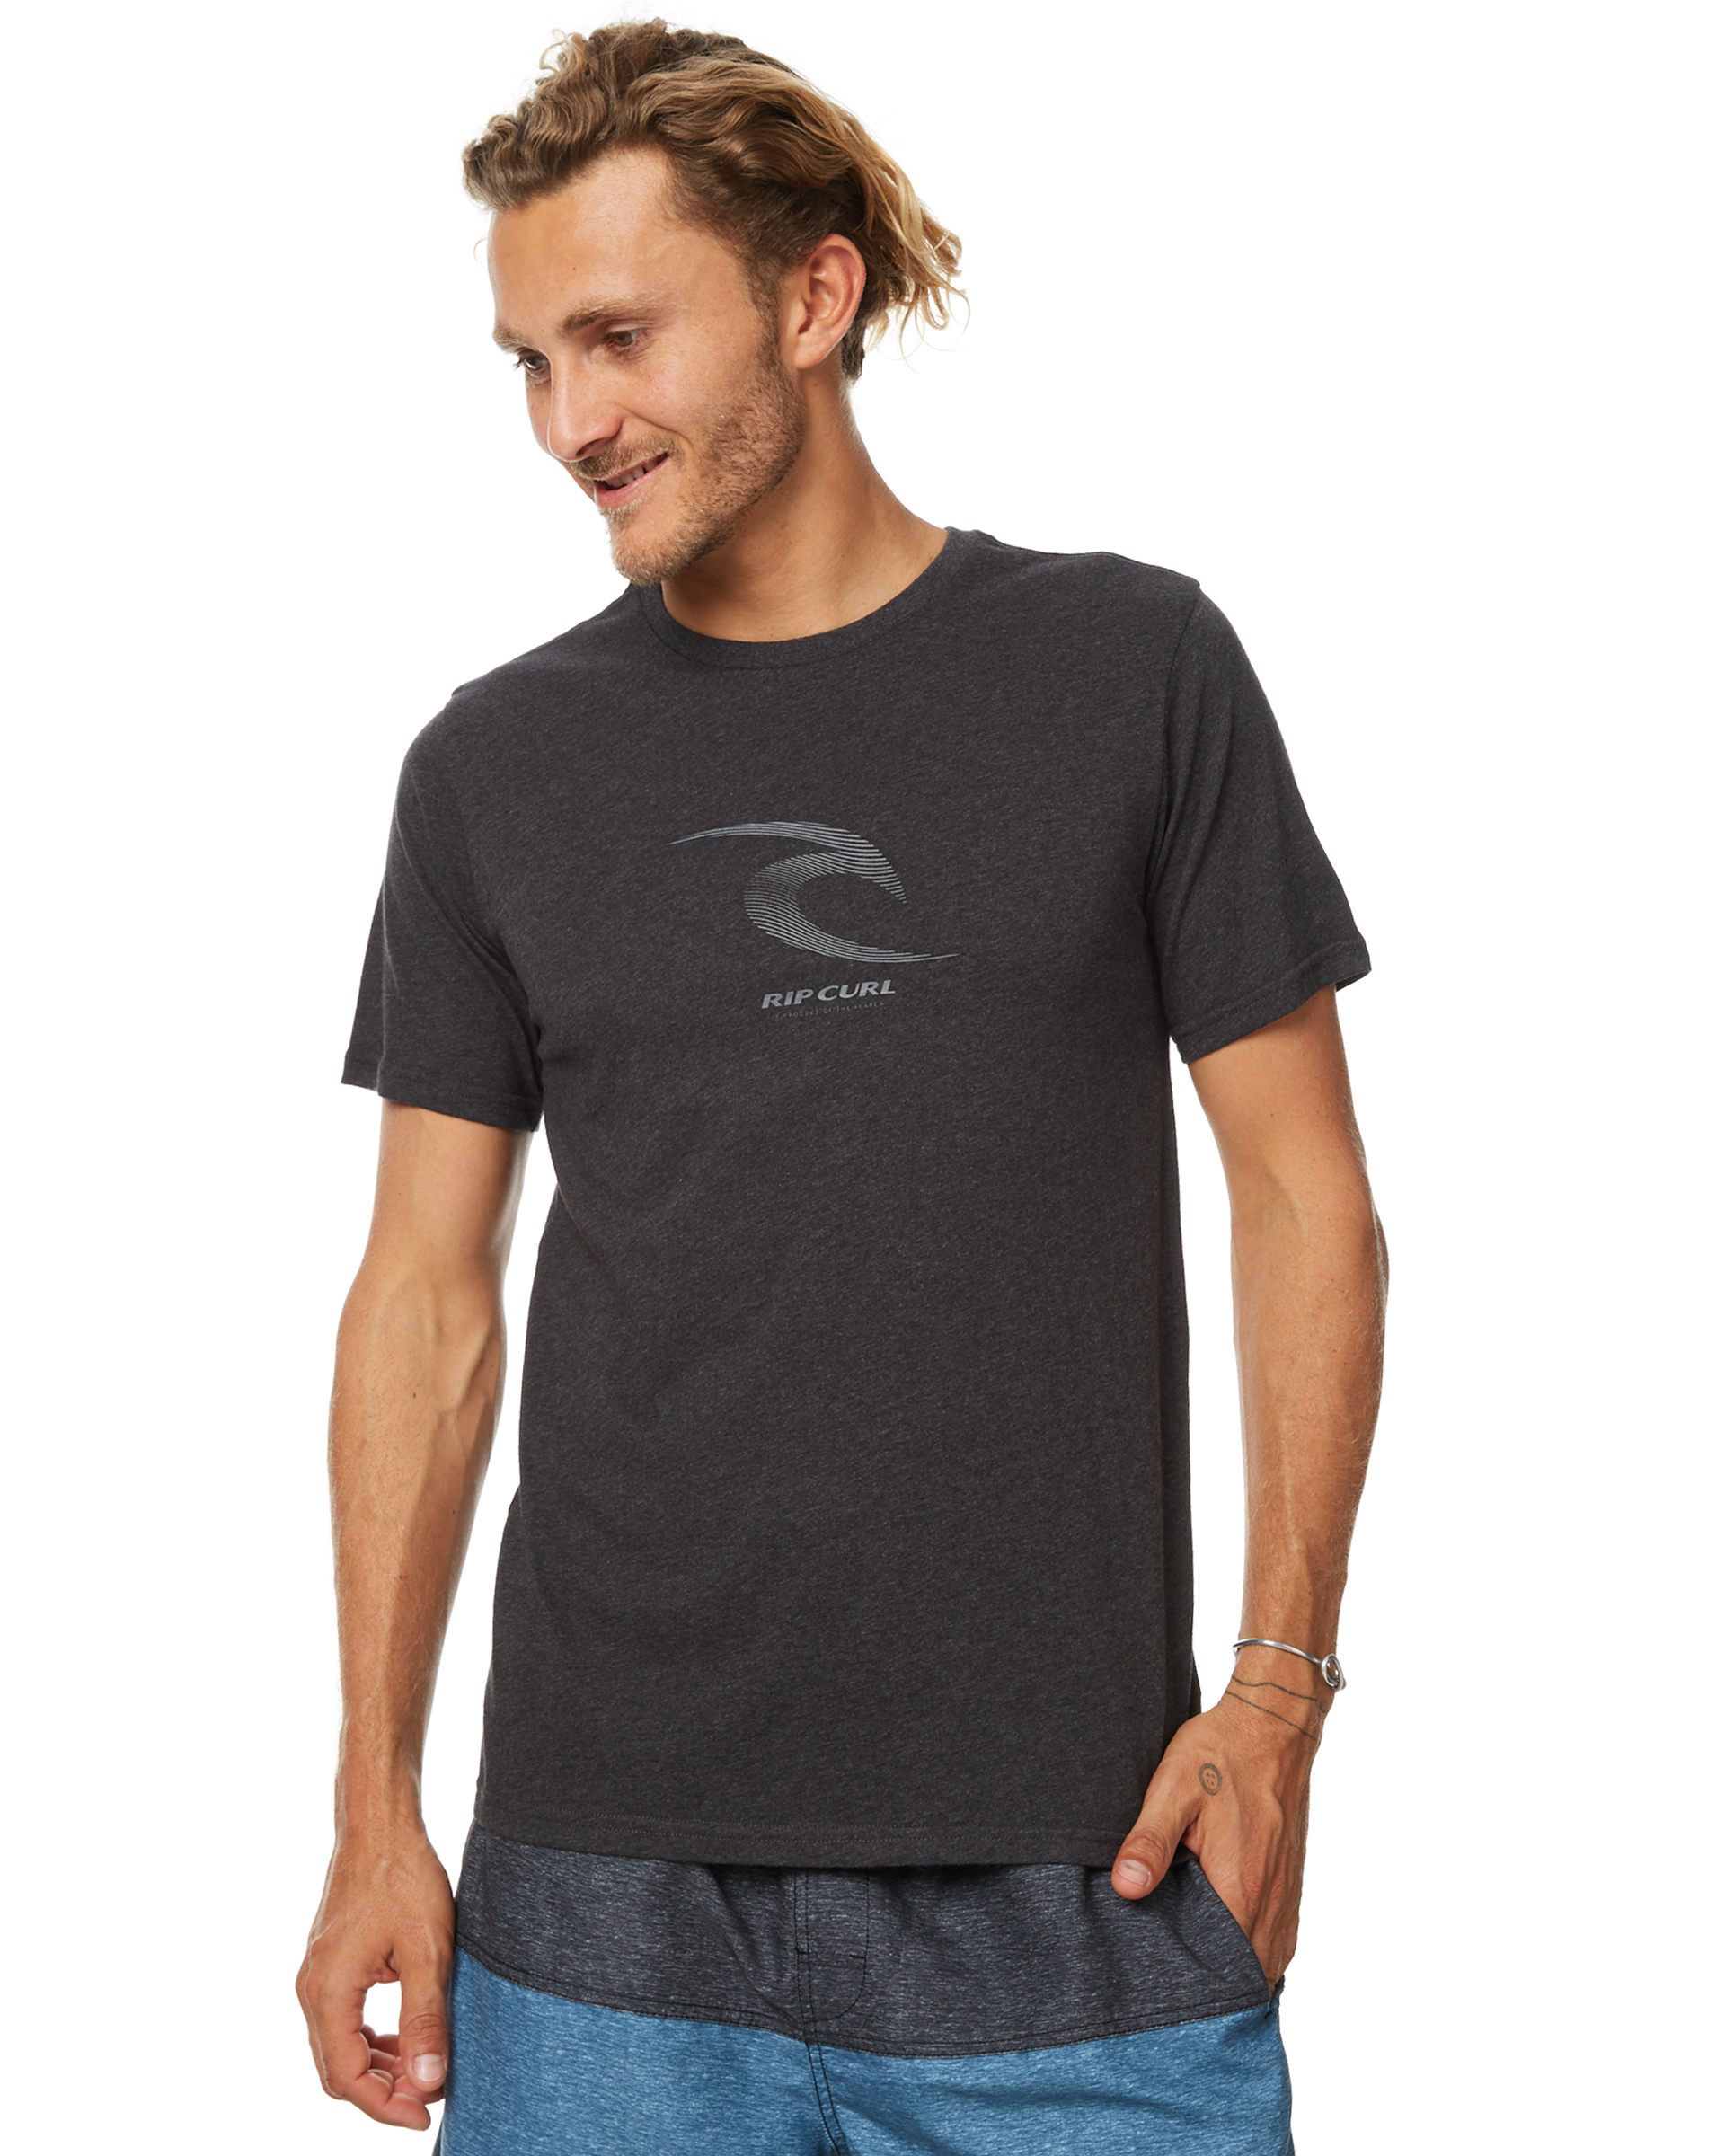 Rip Curl Icon Corp Marle Mens Tee - Black Marle | SurfStitch